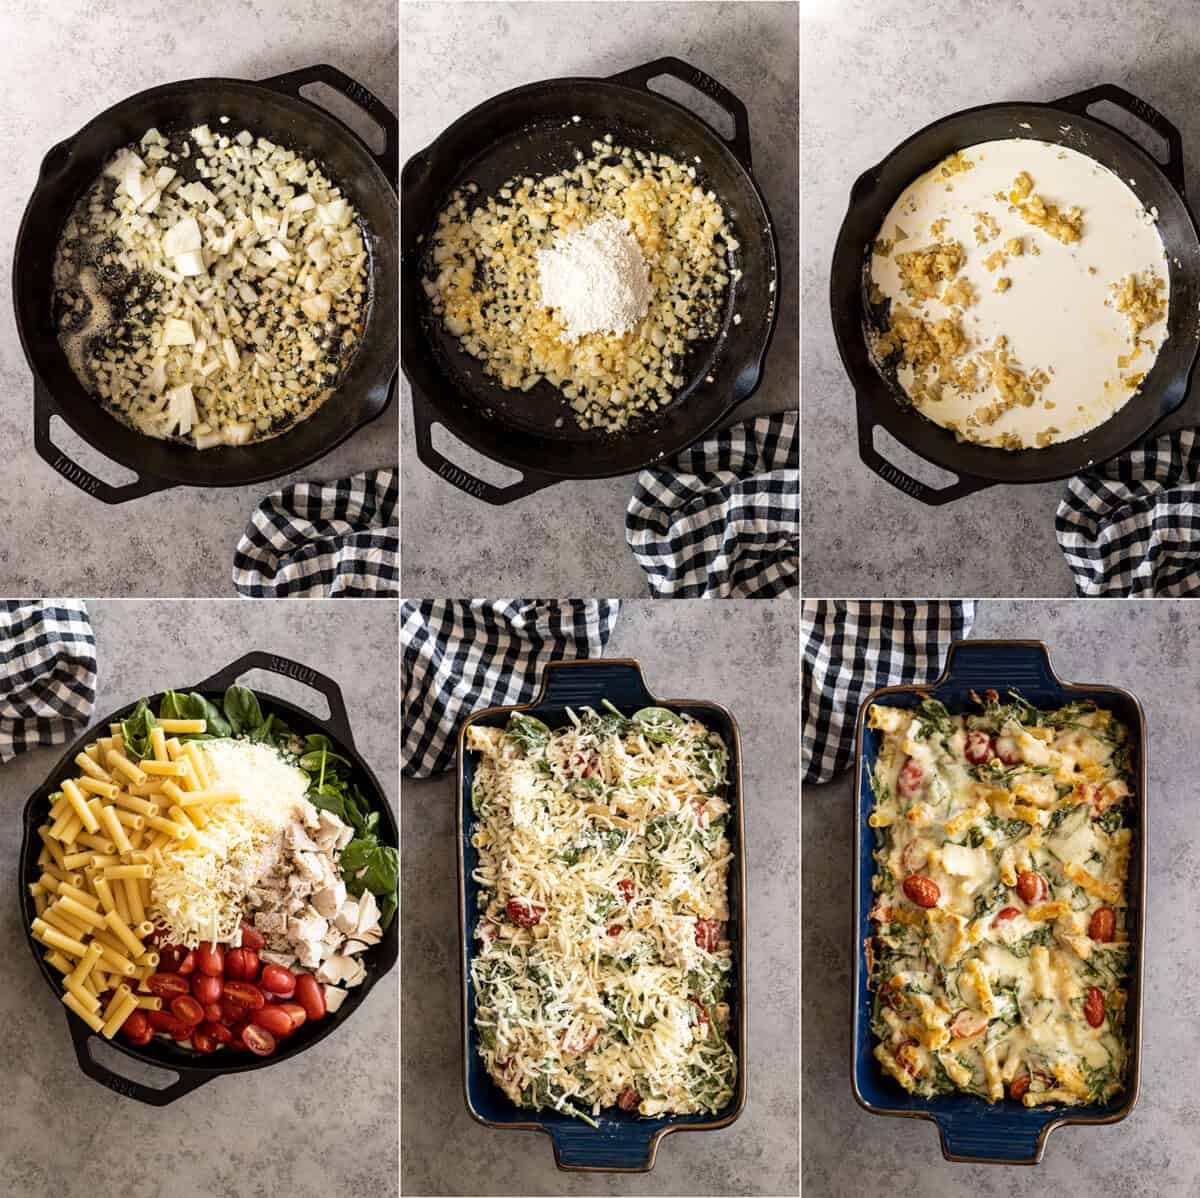 Six pictures showing how to make the casserole: Cook the onion, and garlic in butter; stir in flour; stir in half and half; add remaining ingredients; top with cheese and bake.